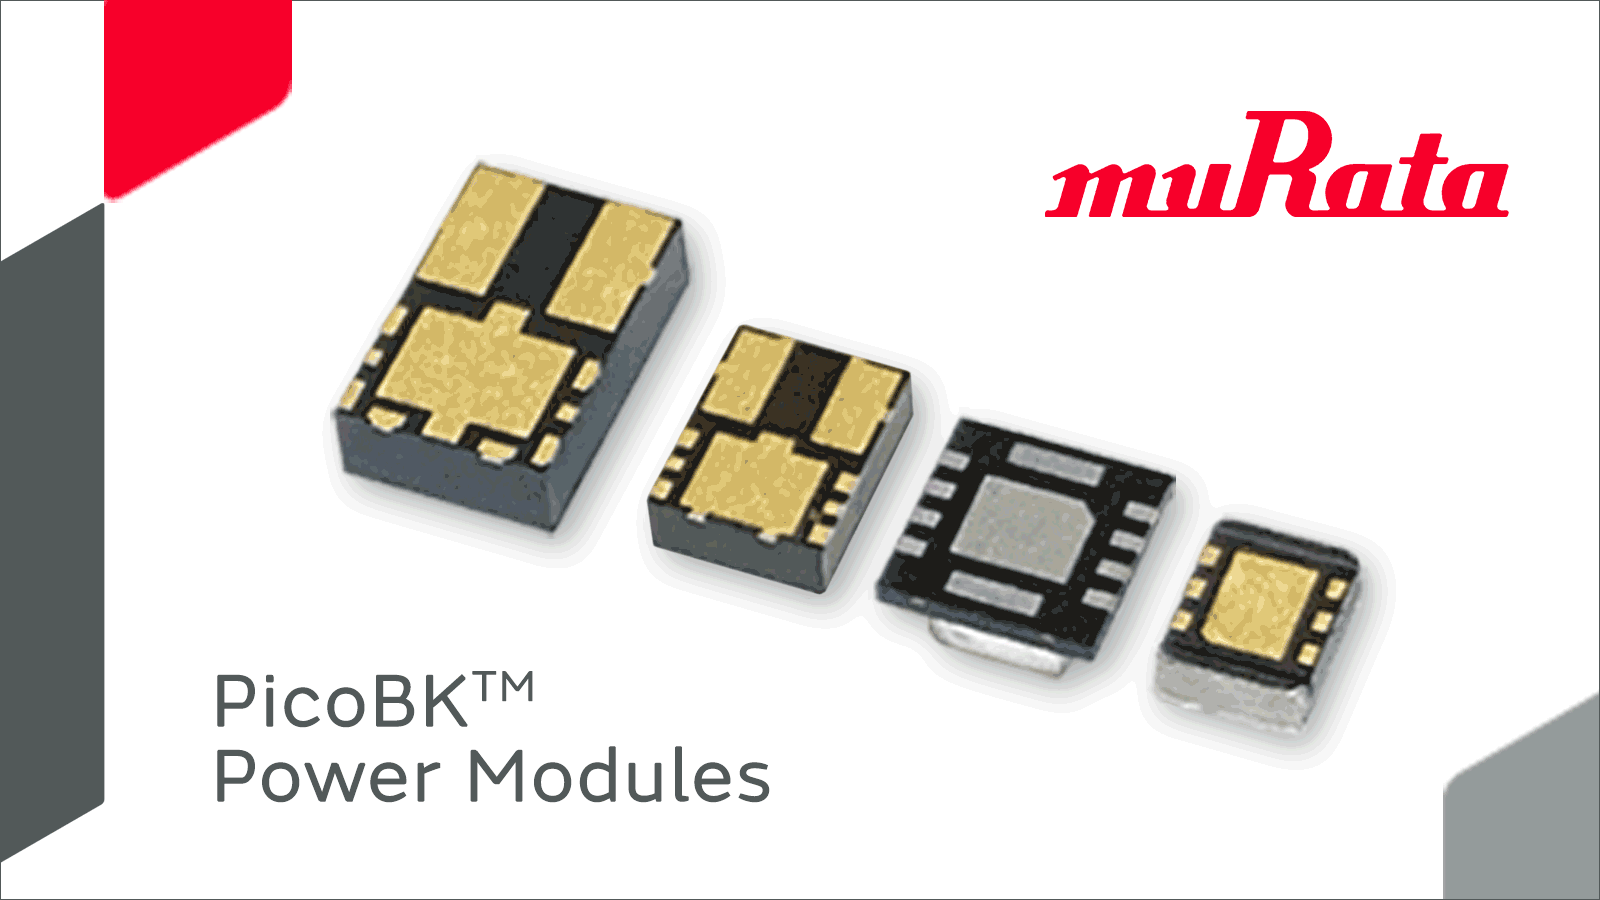 Ultra-small, low noise, power module with fully integrated buck, boost, and negative output regulators for optical transceivers onerror=